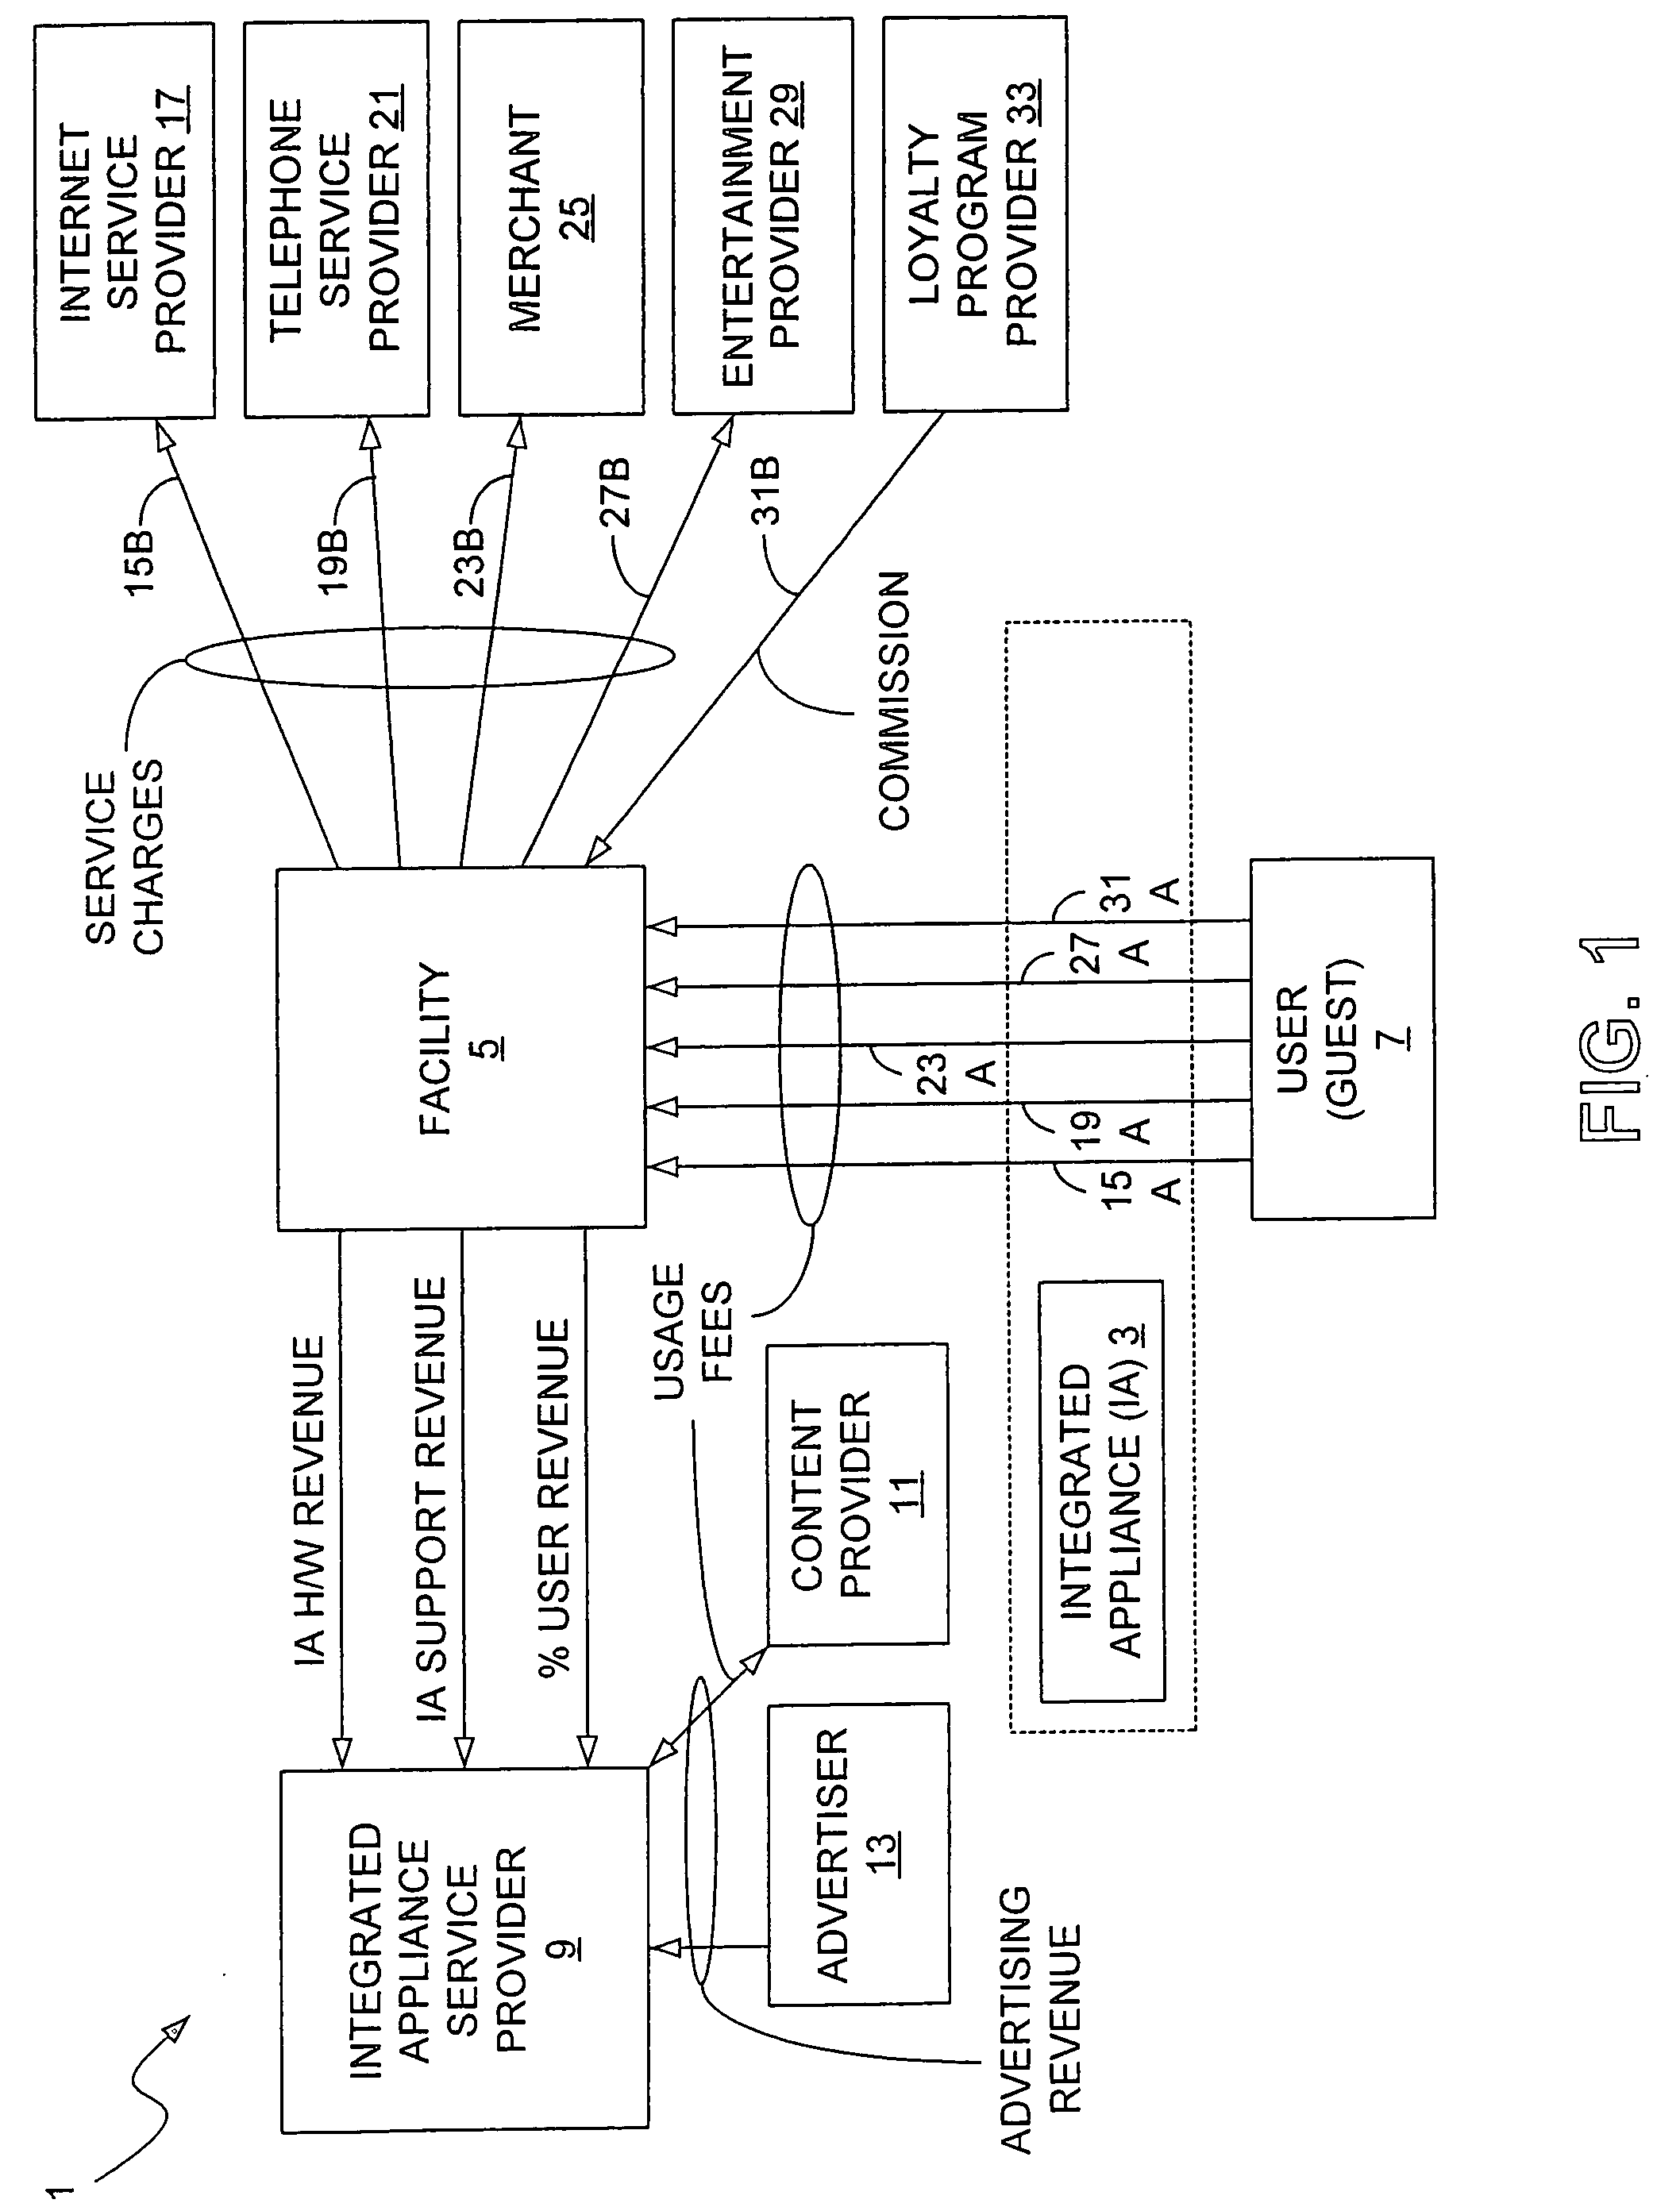 Systems and methods for generating multiple revenue streams involving the use of an integrated appliance